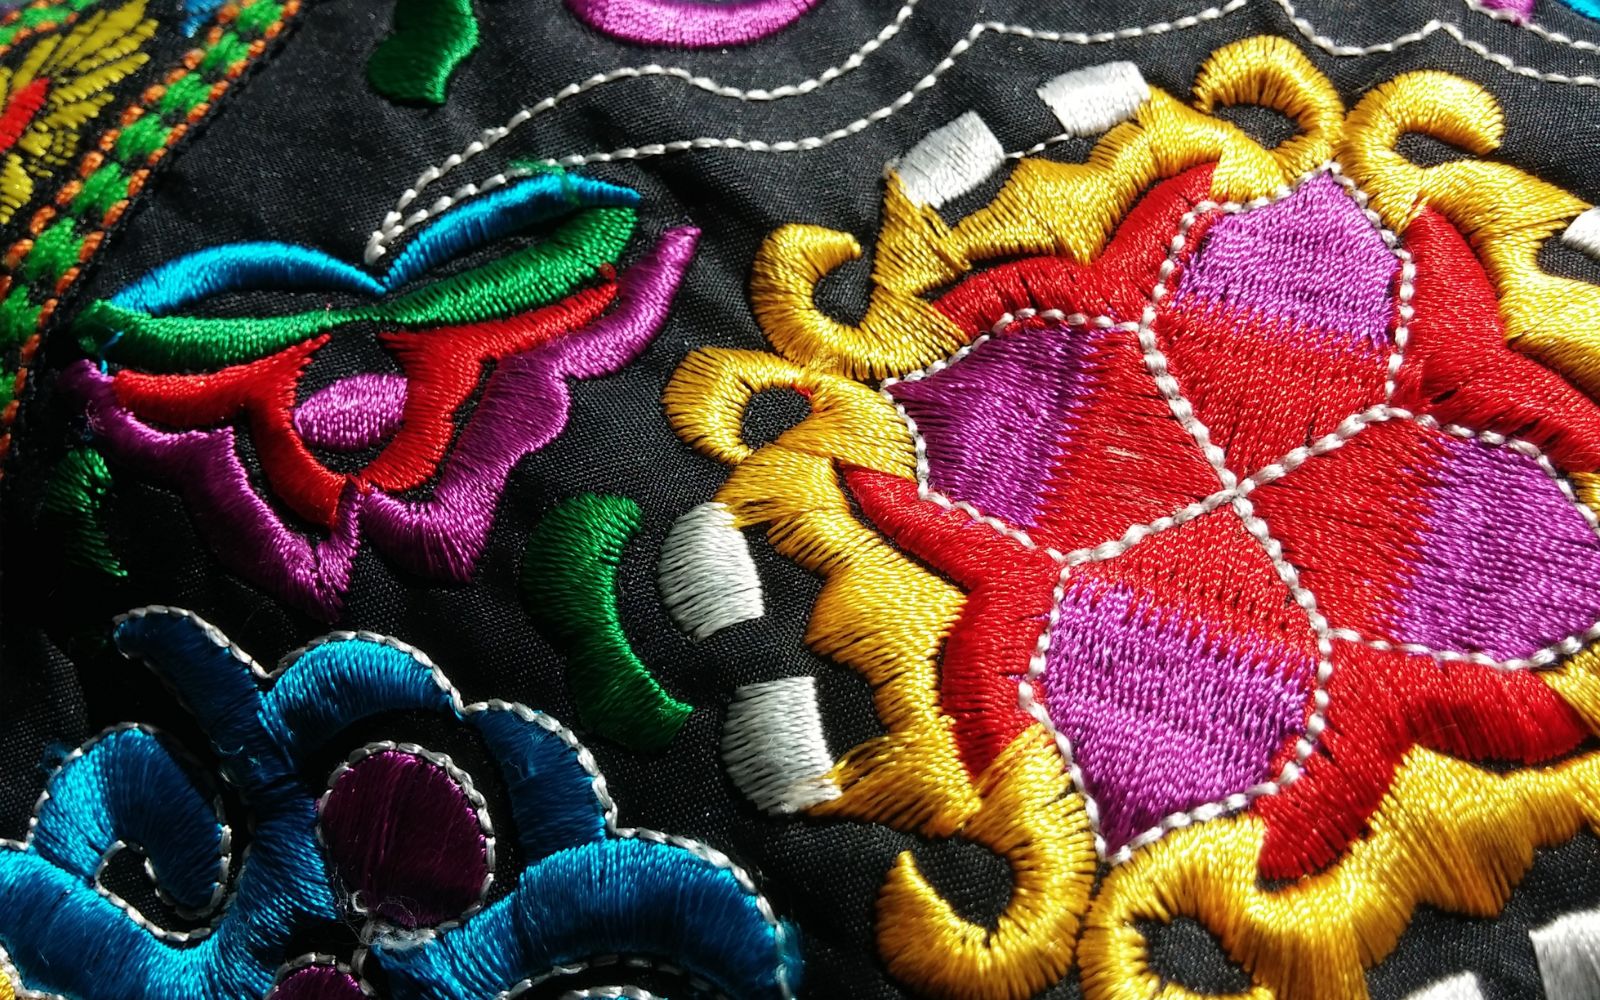 Names for Embroidery and Appliqué Services